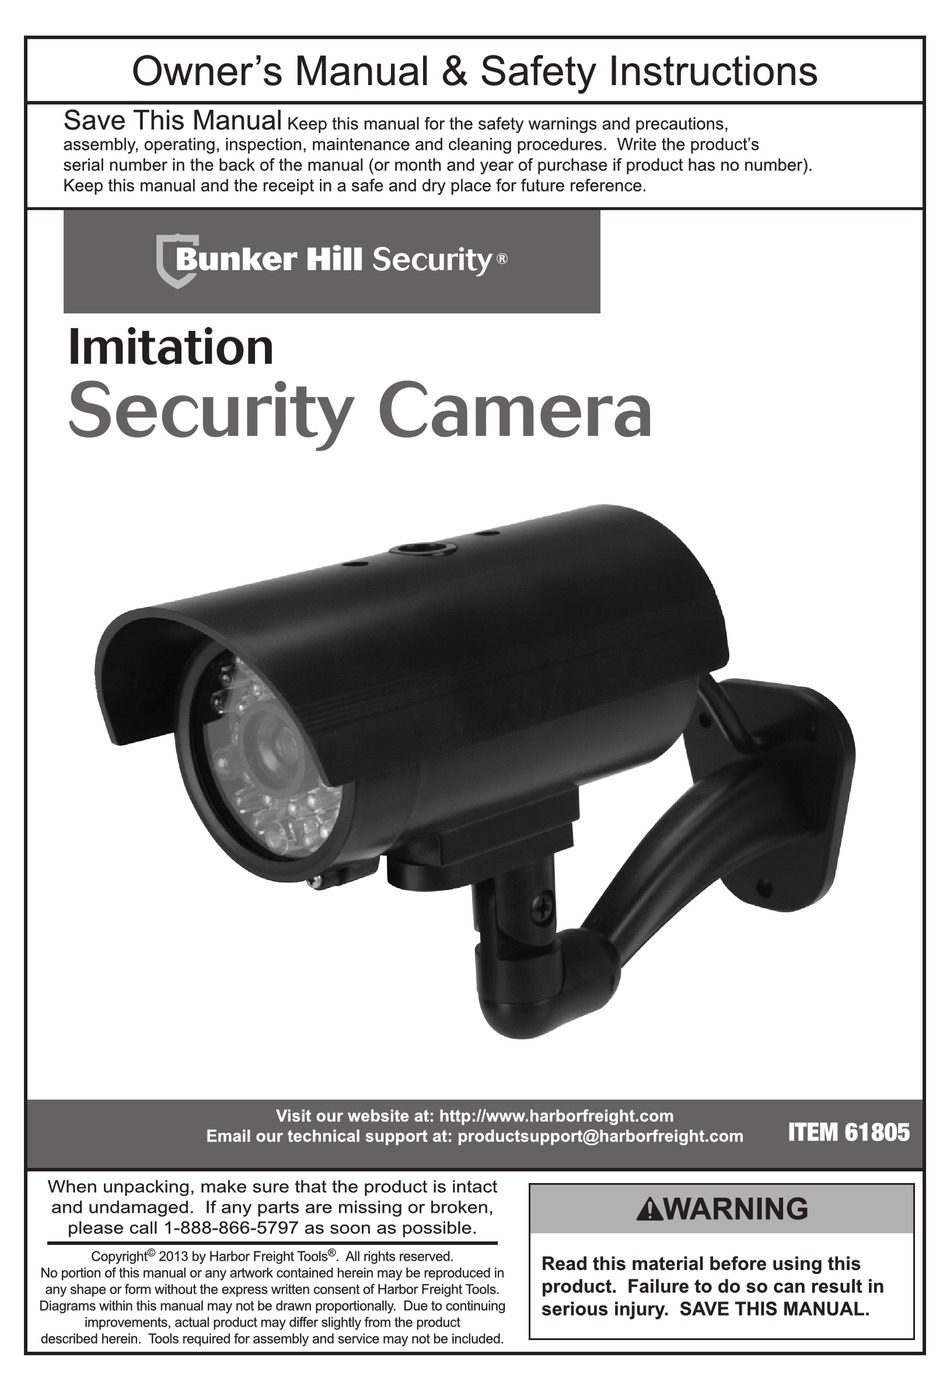 bunker hill wireless security camera software